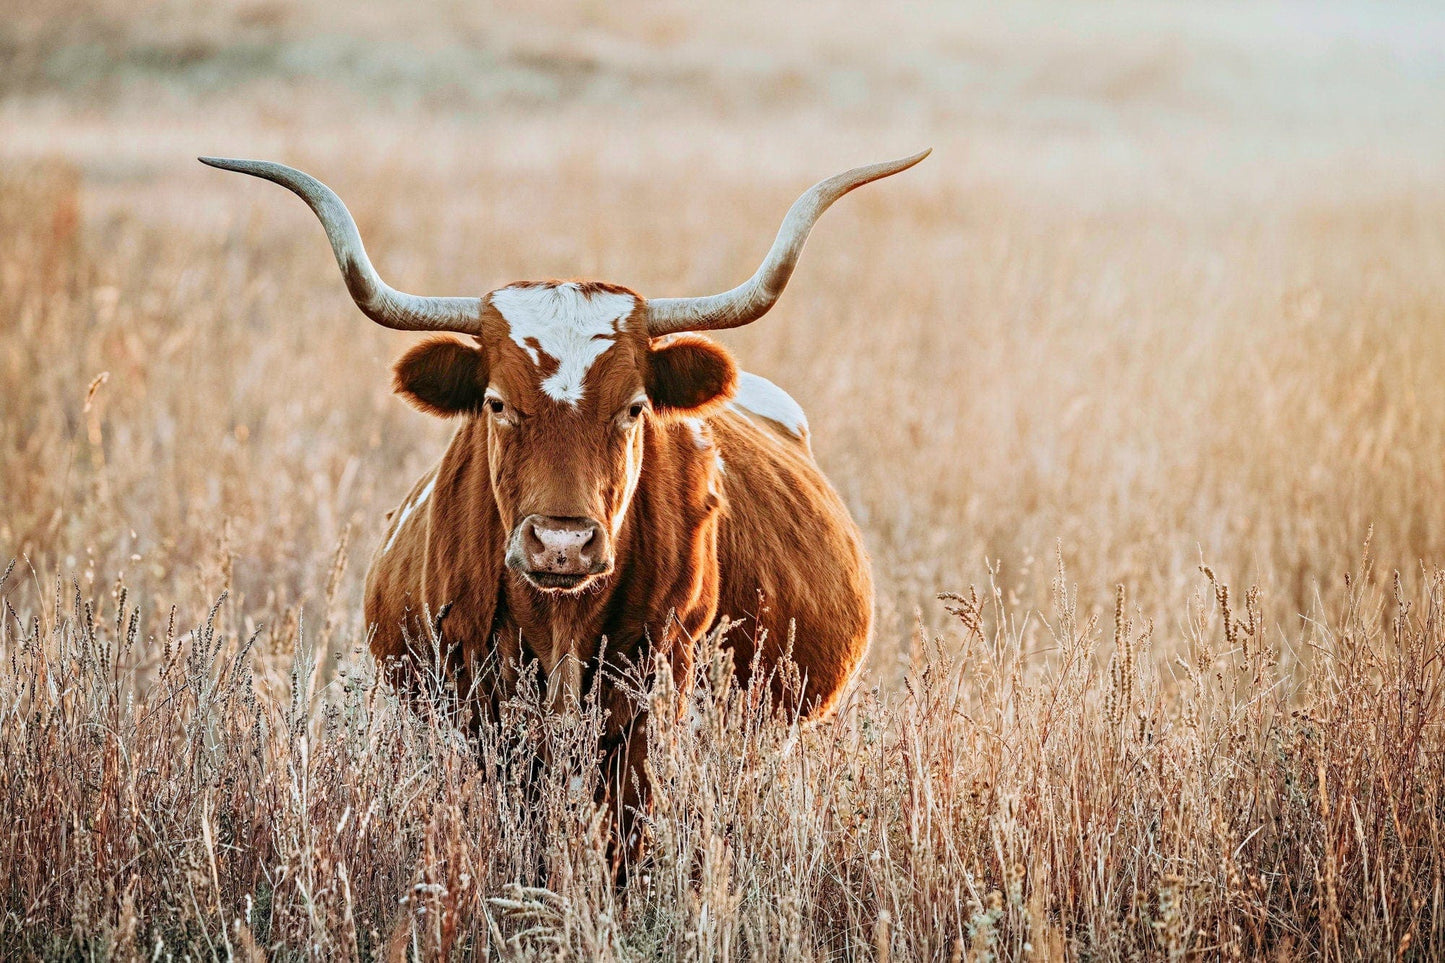 Teri James Photography Wall Art Paper Photo Print / 12 x 18 Inches Texas Longhorn Cow in Tall Grass Canvas Art